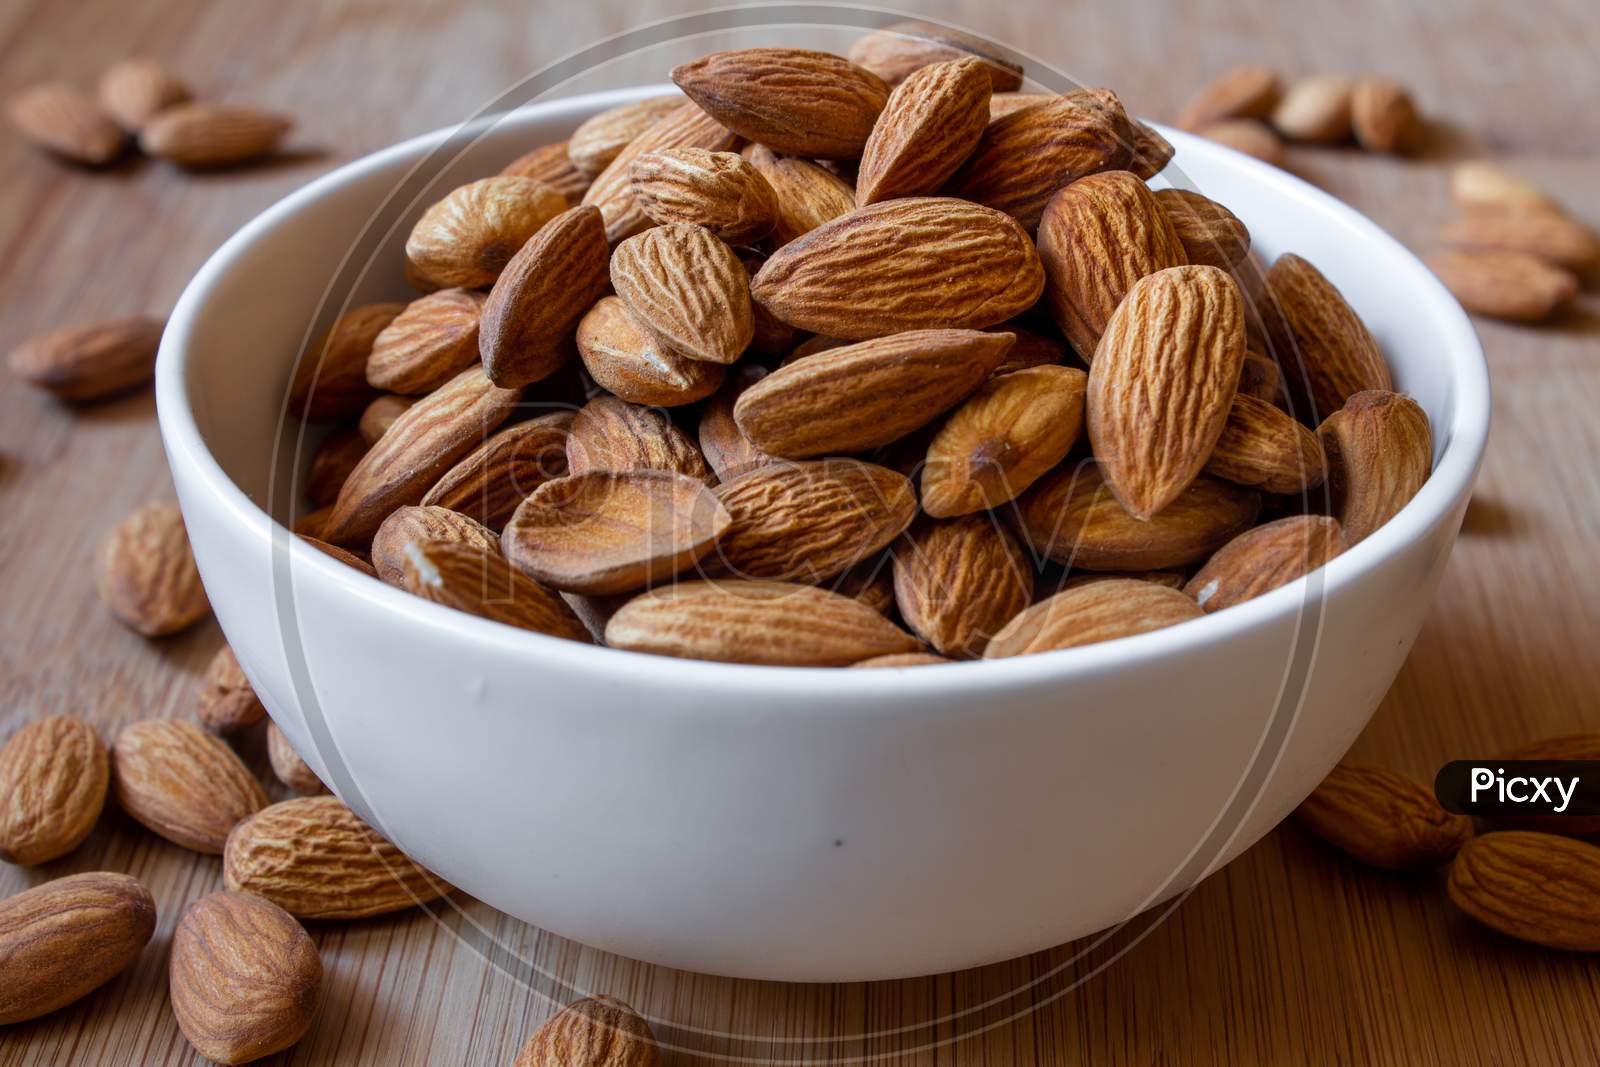 View Of Almonds In A Bowl. Use For Healthy Snack Concept.